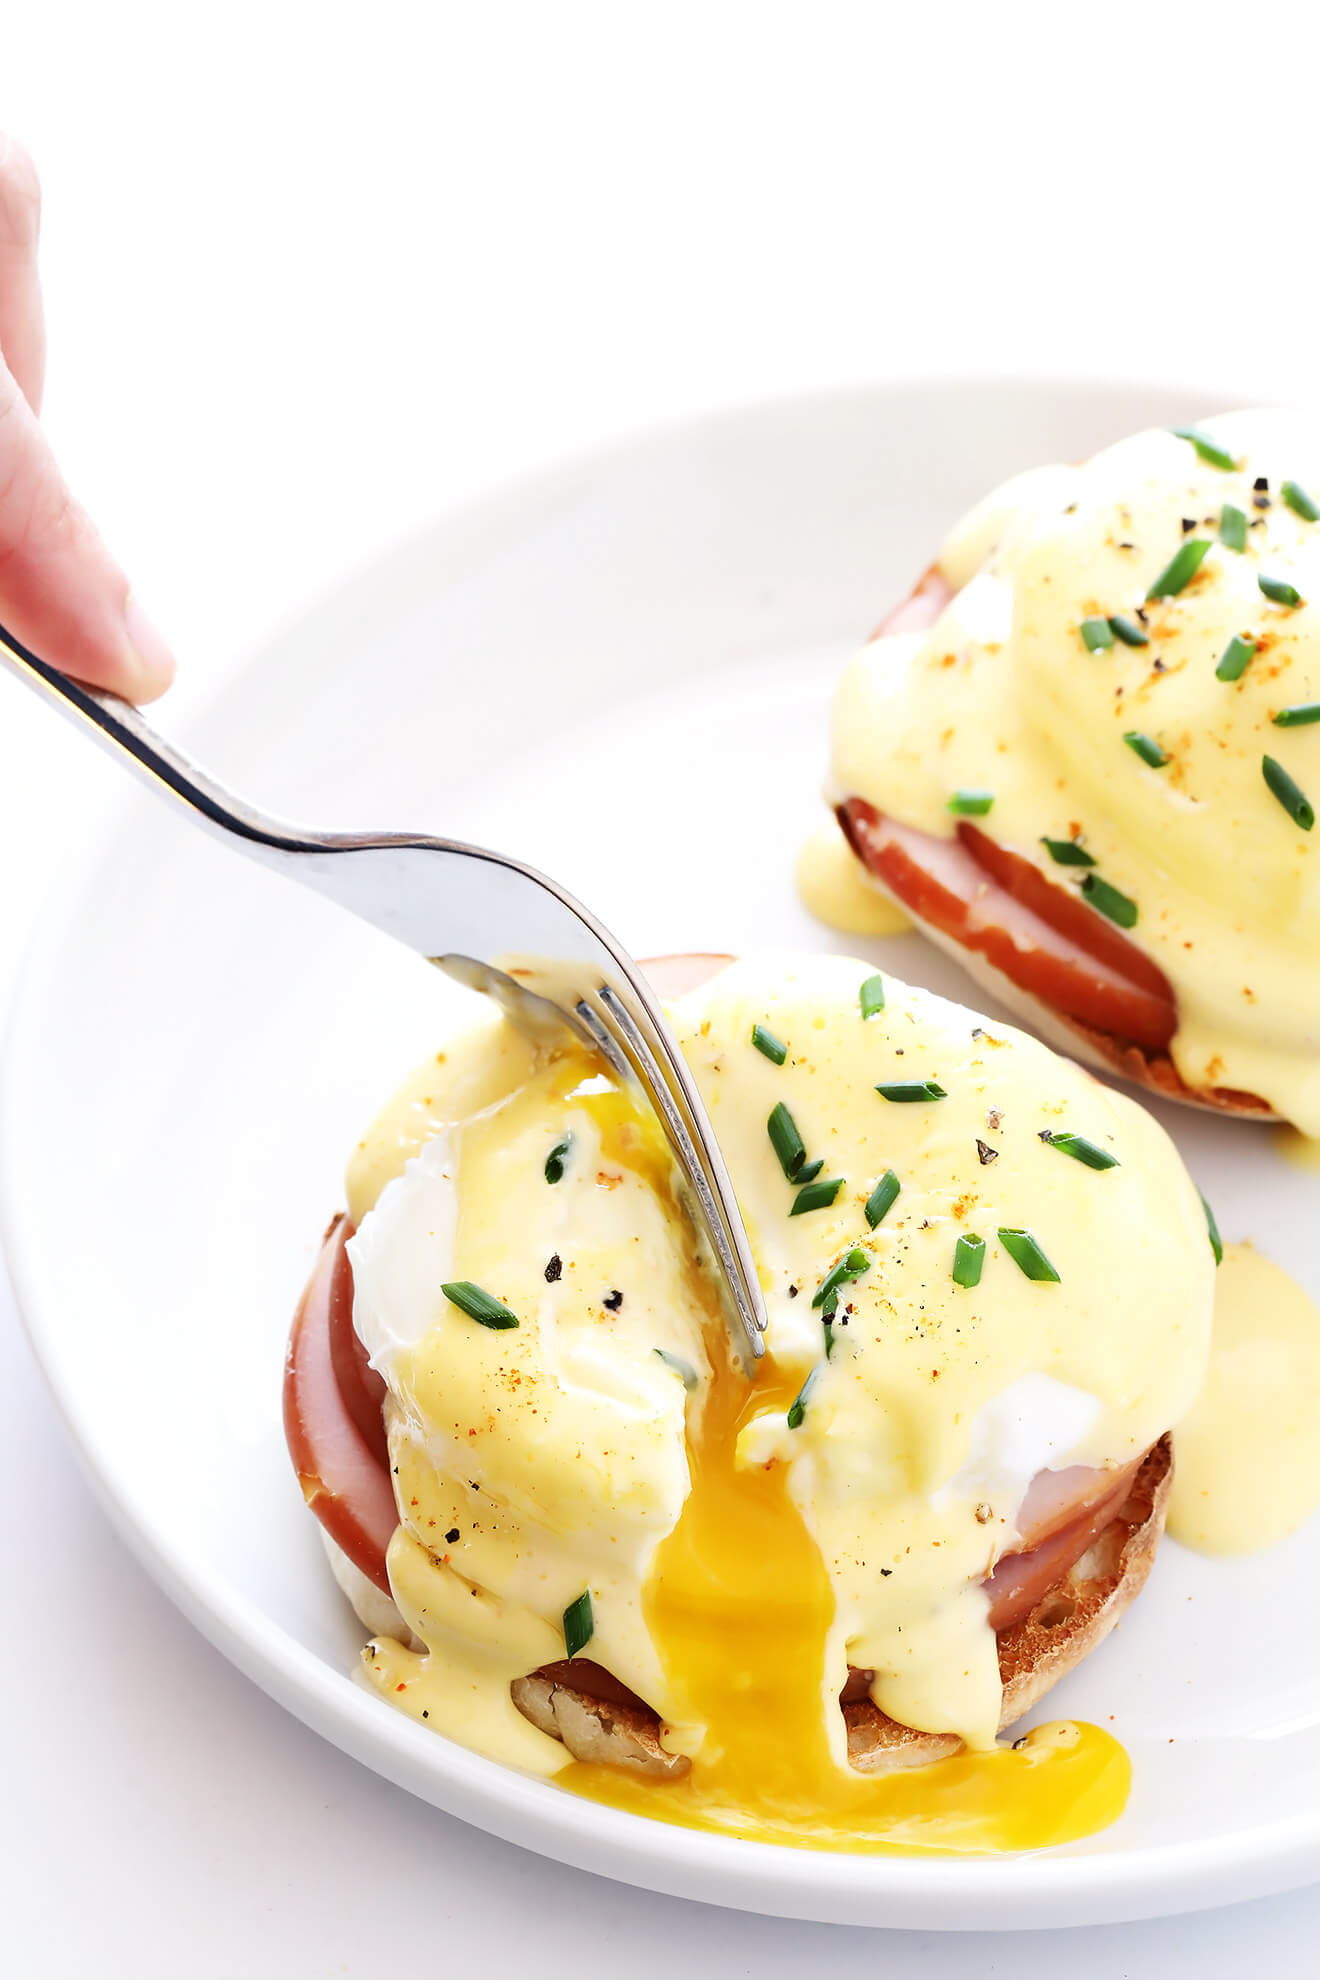 Love the poached eggs in this classic Eggs Benedict recipe! So easy to make, and so delicious! | gimmesomeoven.com